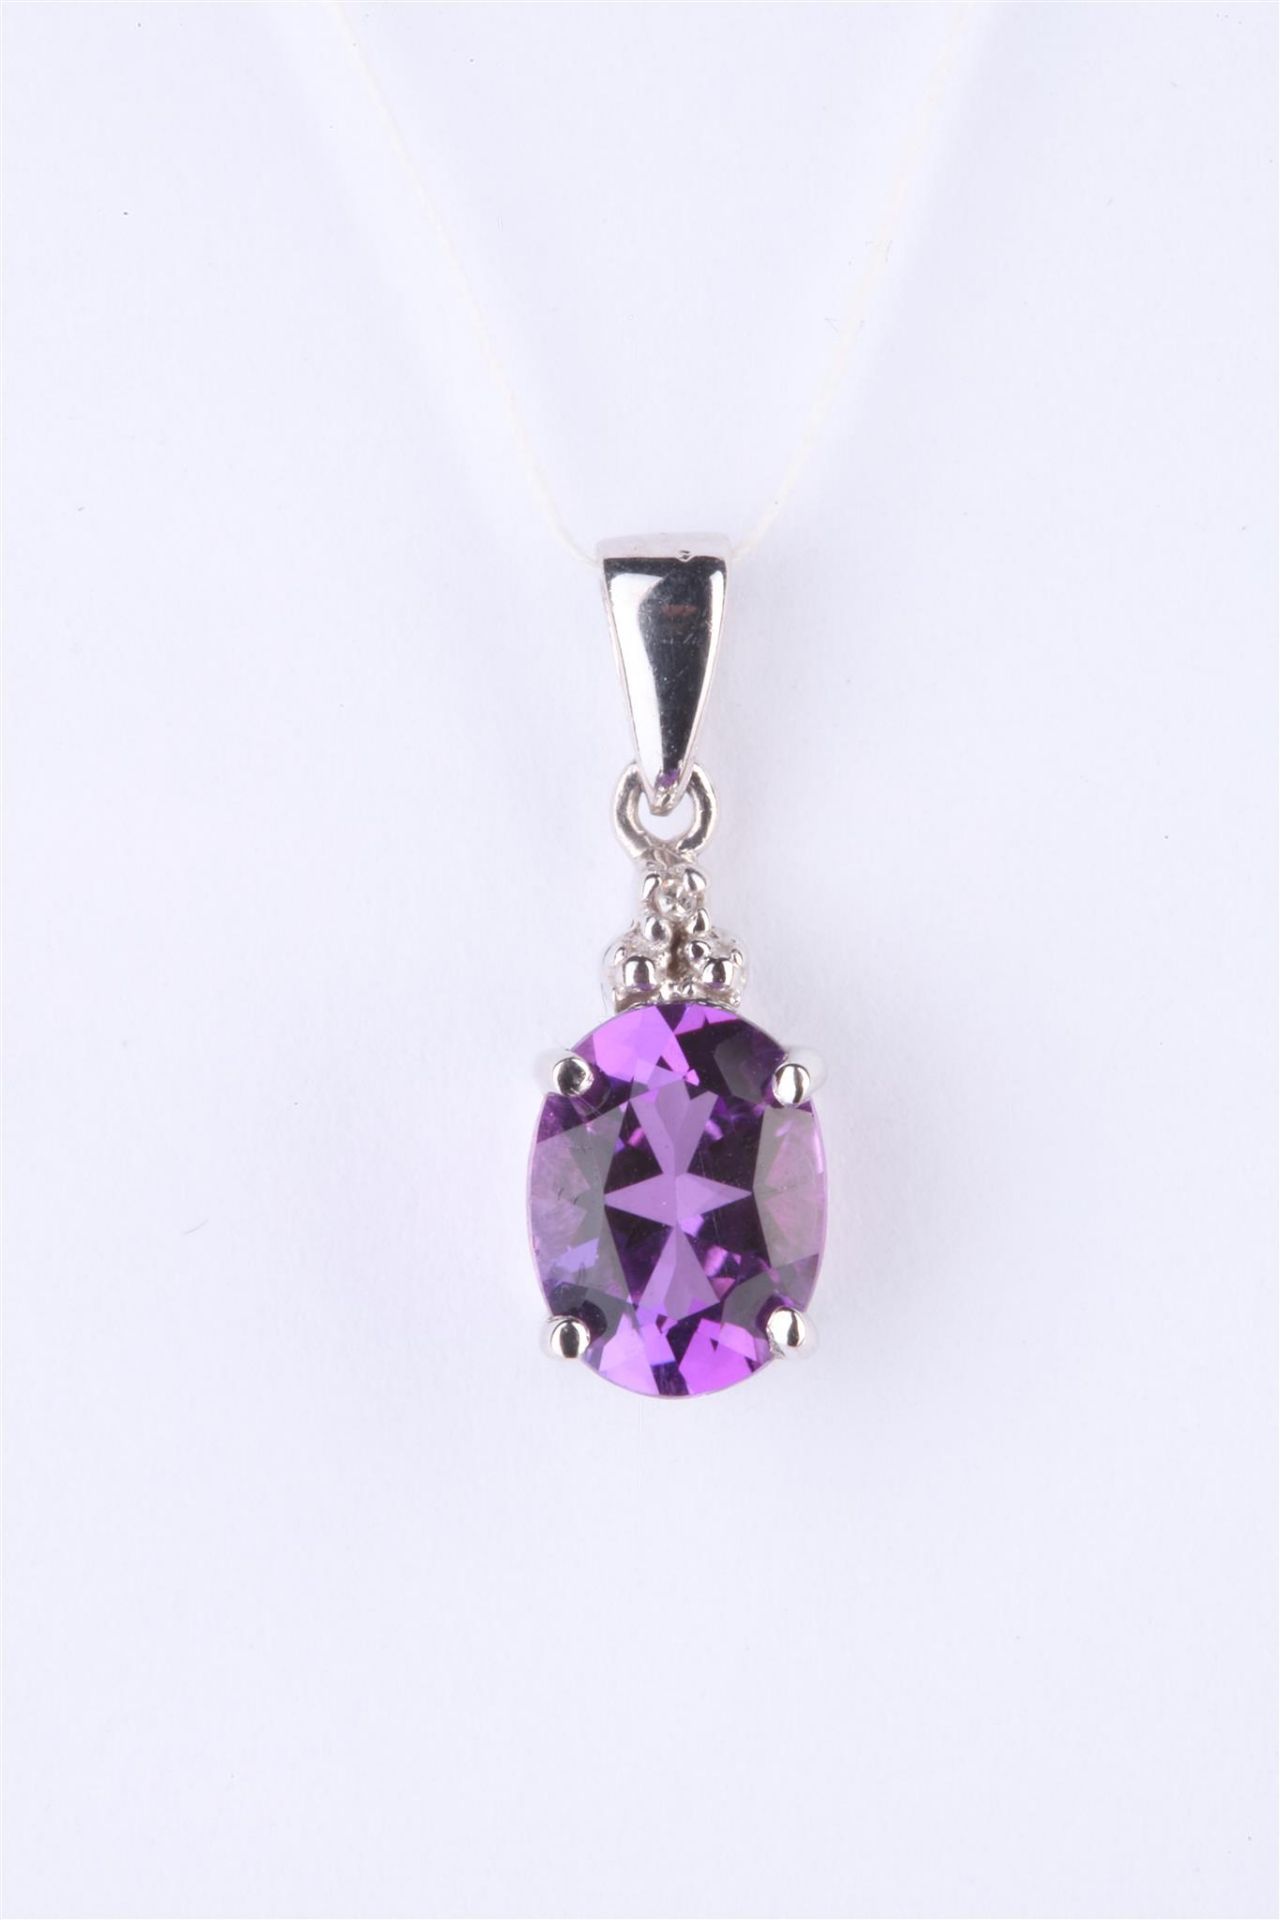 + VAT Ladies Silver Amethyst and Diamond Pendant With Central Oval Amethyst